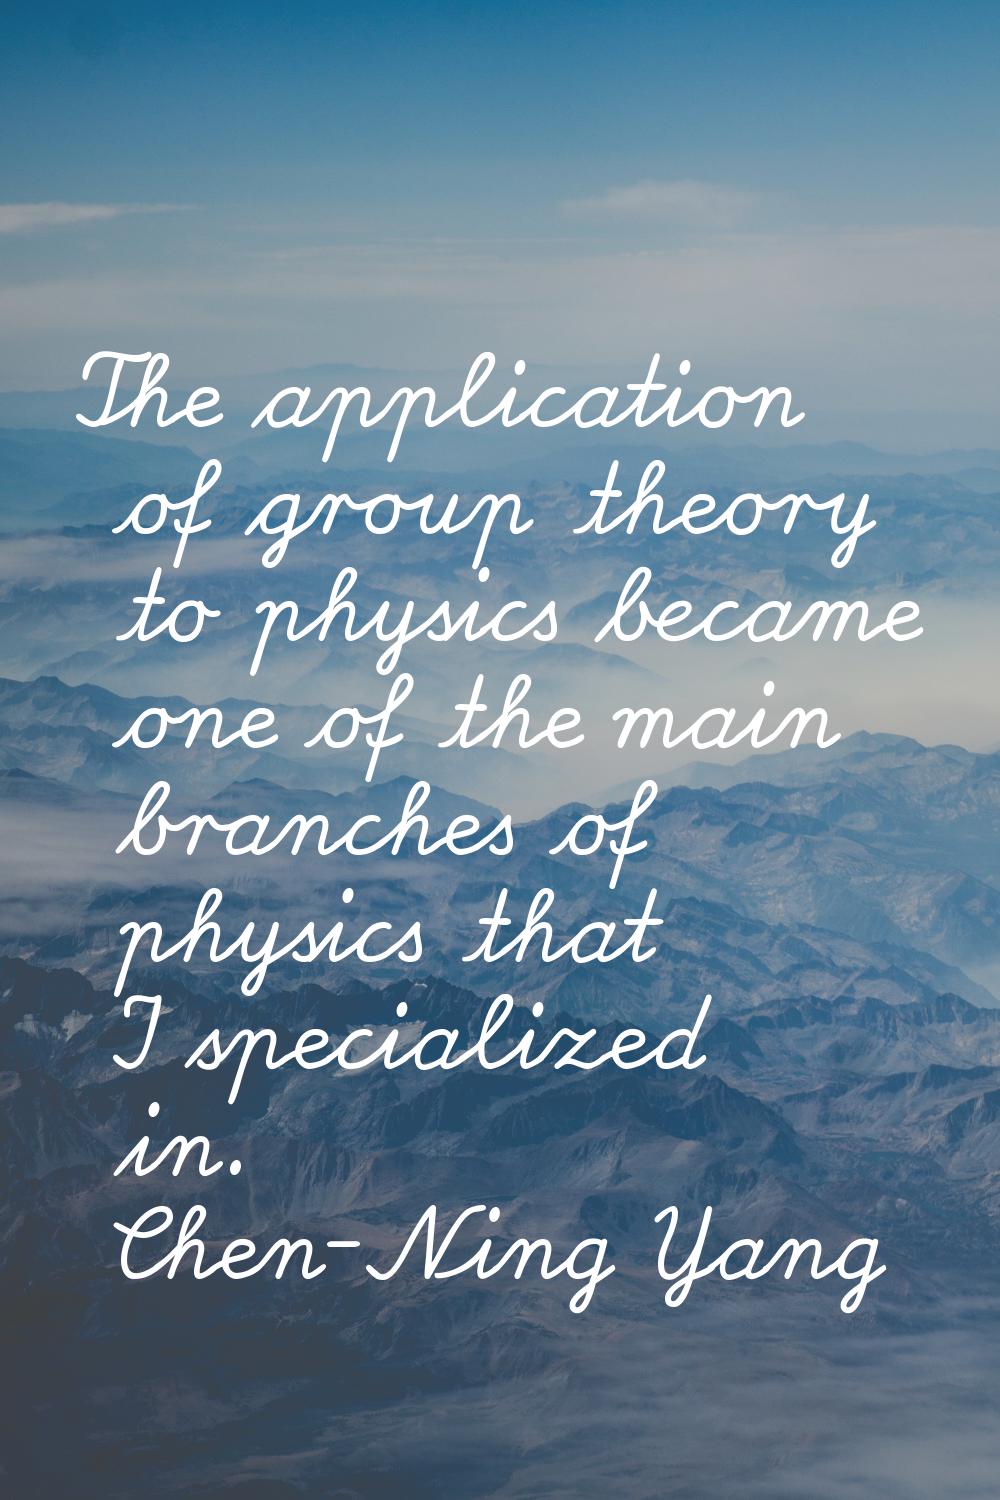 The application of group theory to physics became one of the main branches of physics that I specia